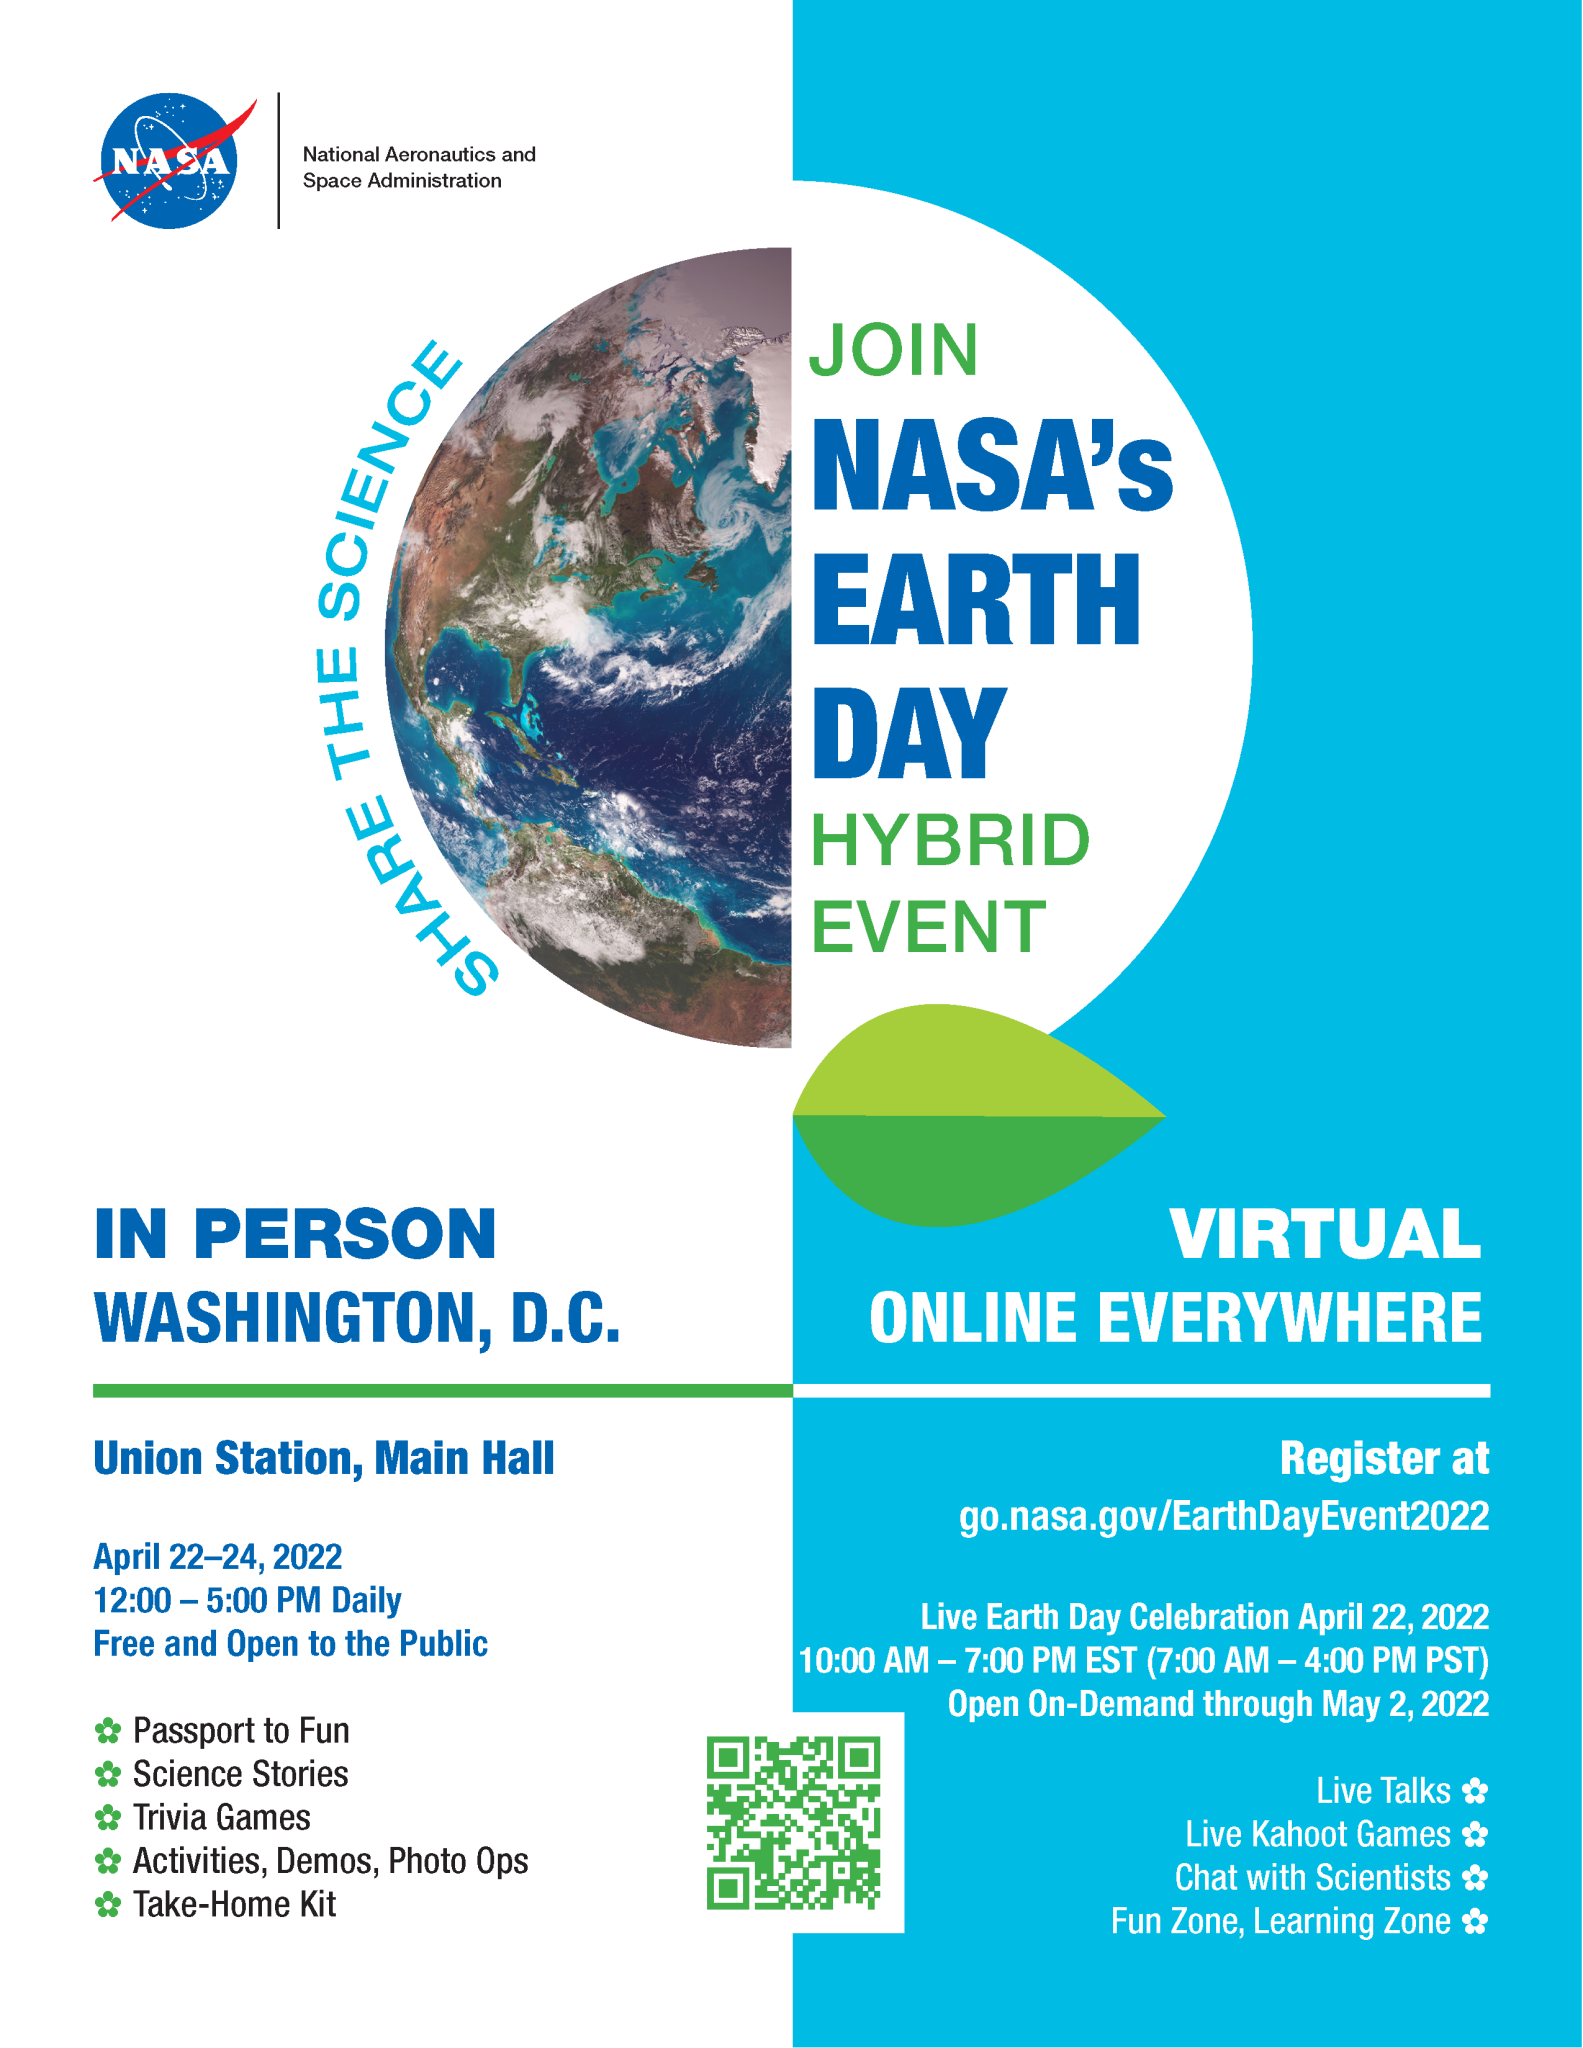 Earth Day dates, online and in person.